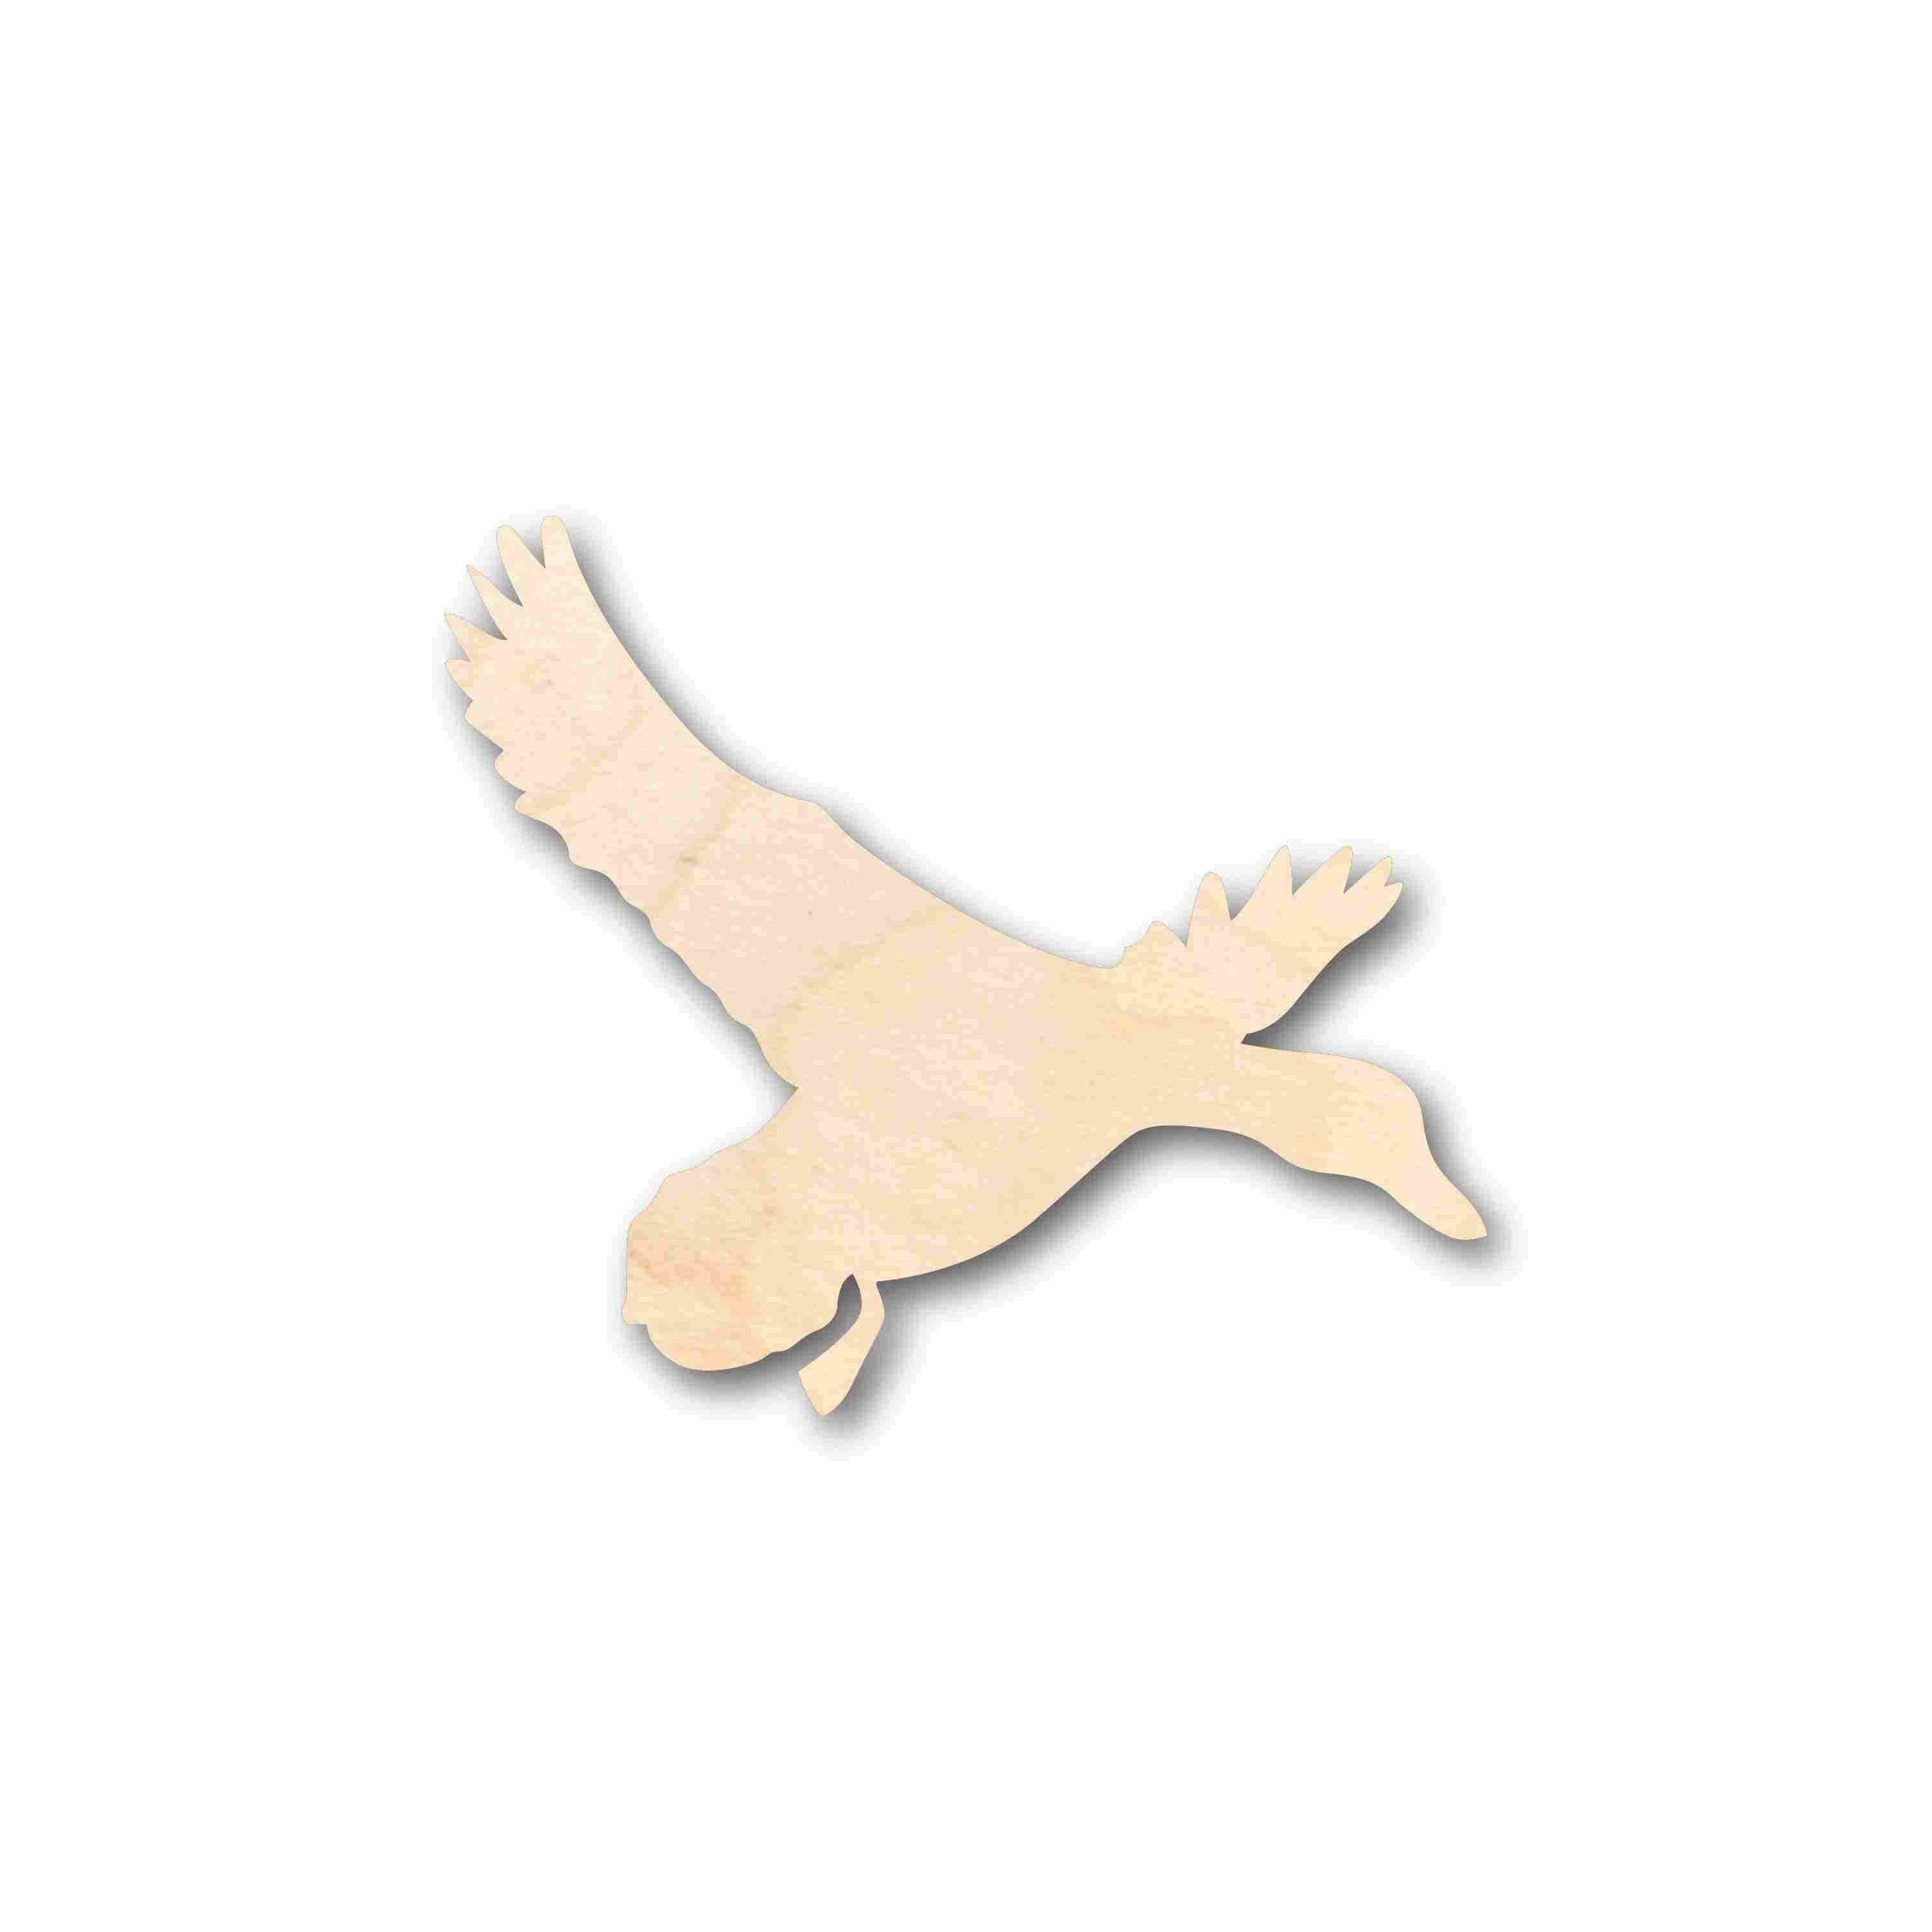 Unfinished Wood Duck Mallard Silhouette - Craft- up to 24